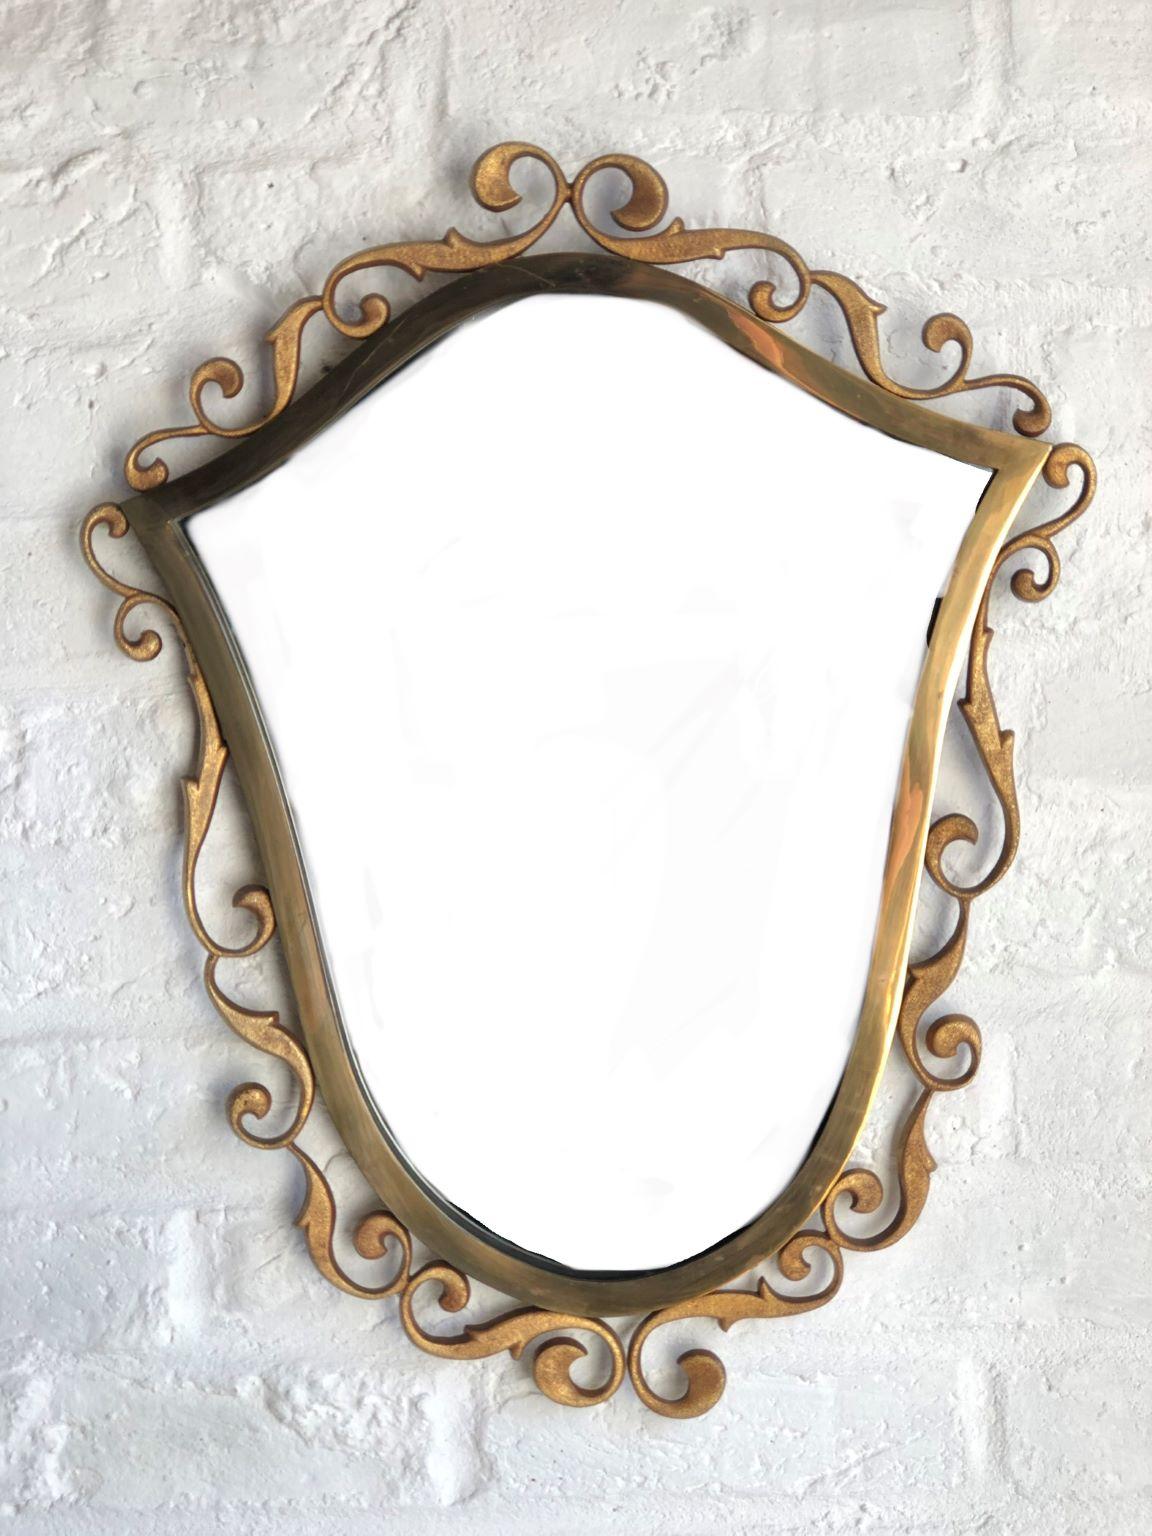 A beautiful Mid century bronze wall mirror signed by Moderna, Italy, 1940s

Elegant shield shape frame which is a combination of textured and polished surfaces.
Outer edge is adorned with scrolling shapes that are not quite symmetrical, which adds